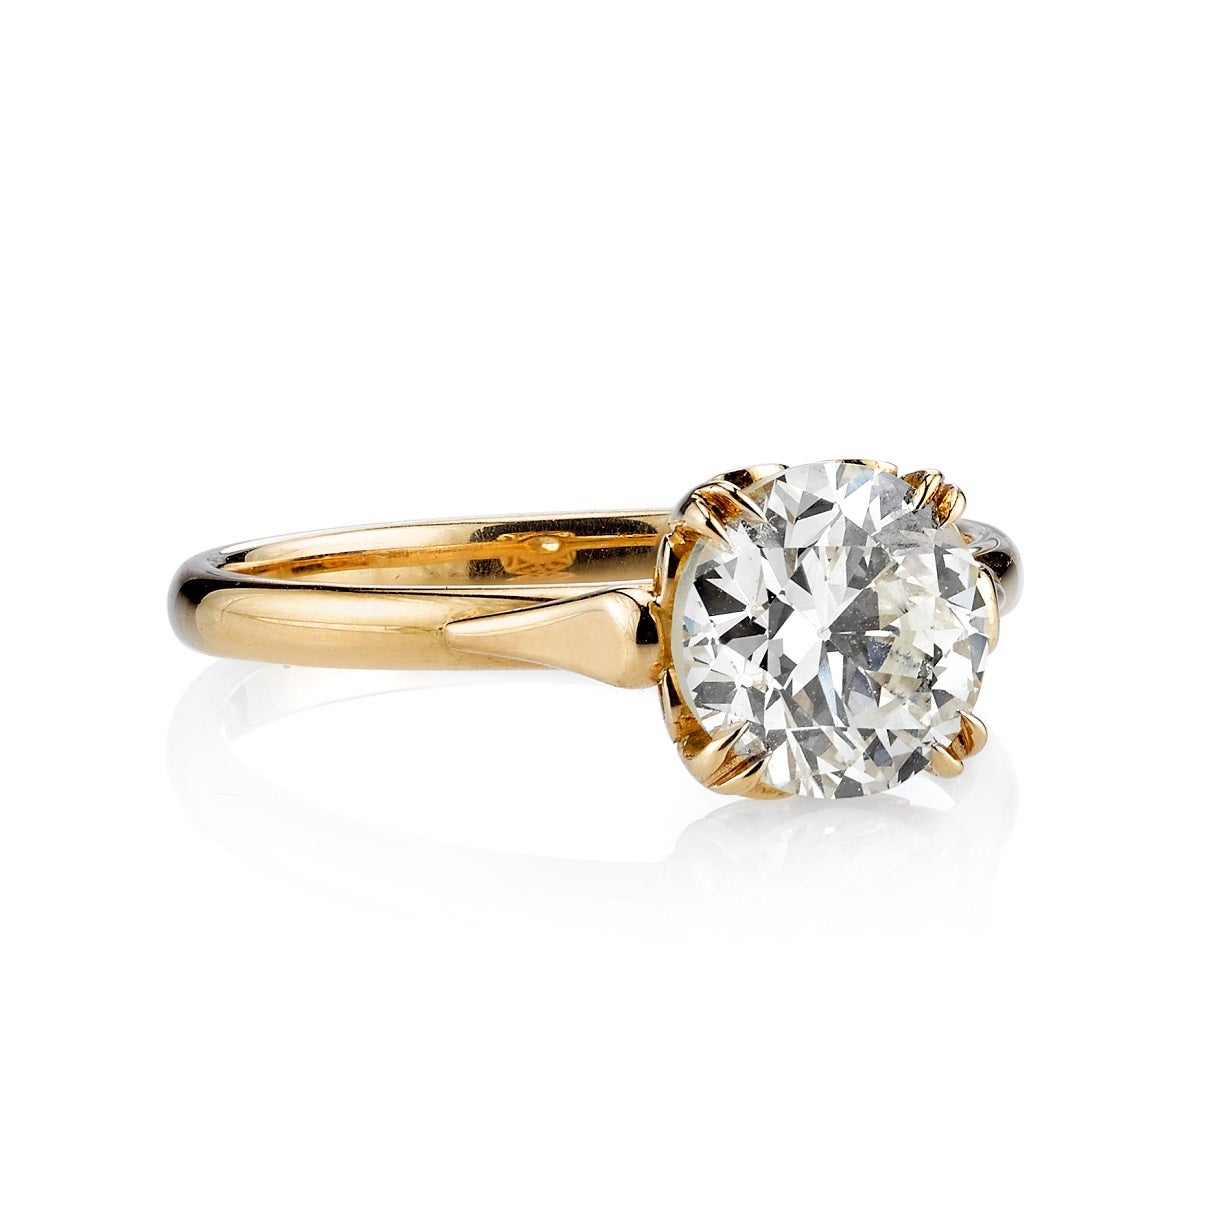 1.57ct N/VS old European cut diamond set in a handcrafted 18K yellow gold mounting. A classic solitaire design that features a intricate gallery.